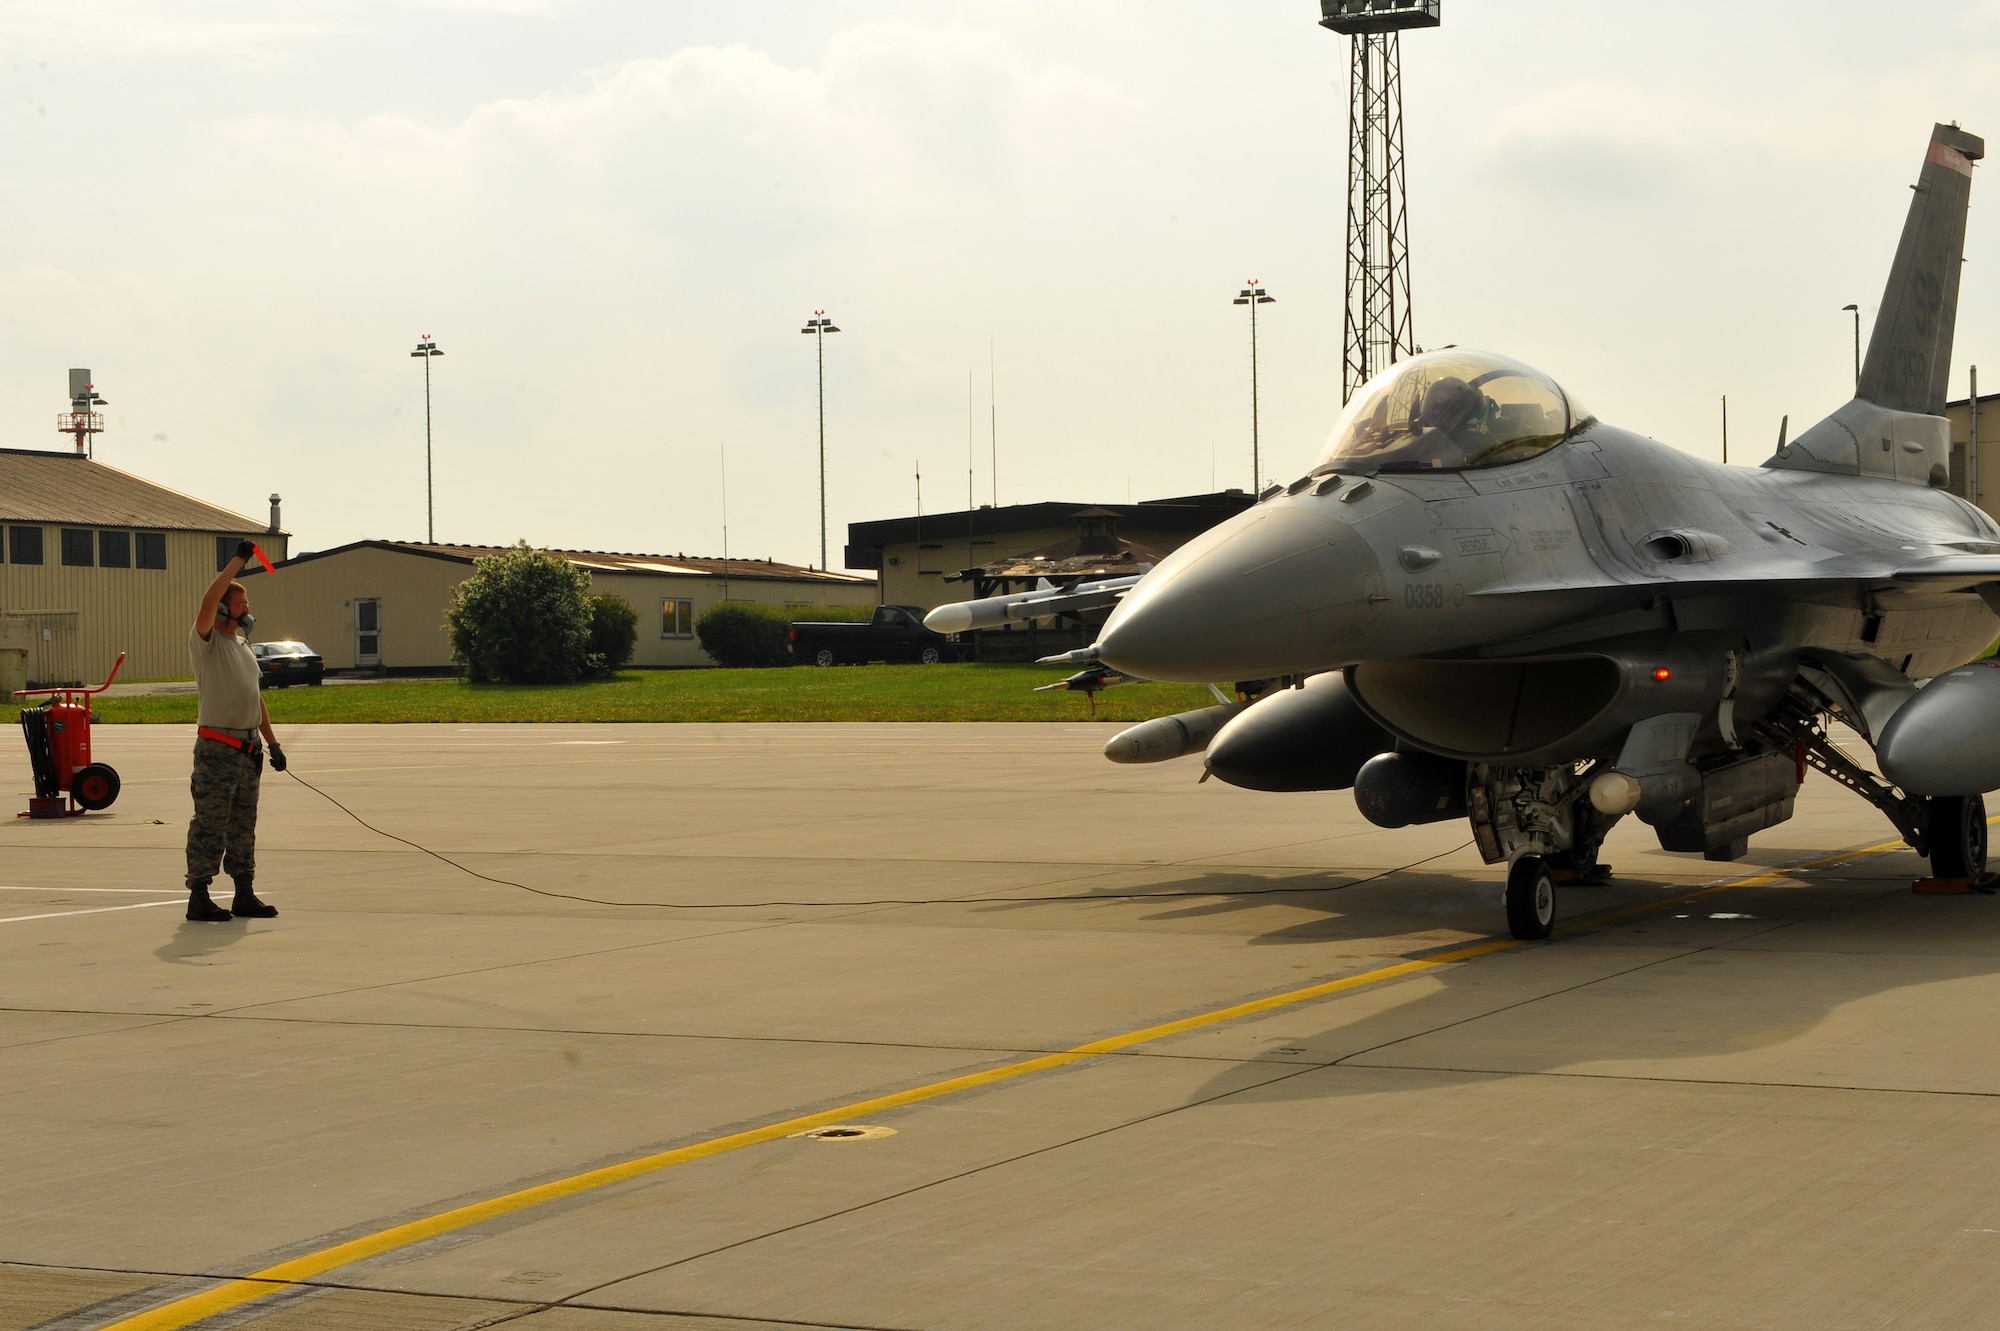 SPANGDAHLEM AIR BASE, Germany – Airman 1st Class Joshua Berard, 480th Aircraft Maintenance Unit crew chief, completes a standard aircraft launch procedure for an F-16 Fighting Falcon on Ramp 4 here June 19. The 480th AMU plays a vital role in supporting the F-16’s combat training mission, which prepares them for regional defense and air superiority. (U.S. Air Force photo by Airman 1st Class Dillon/Released)